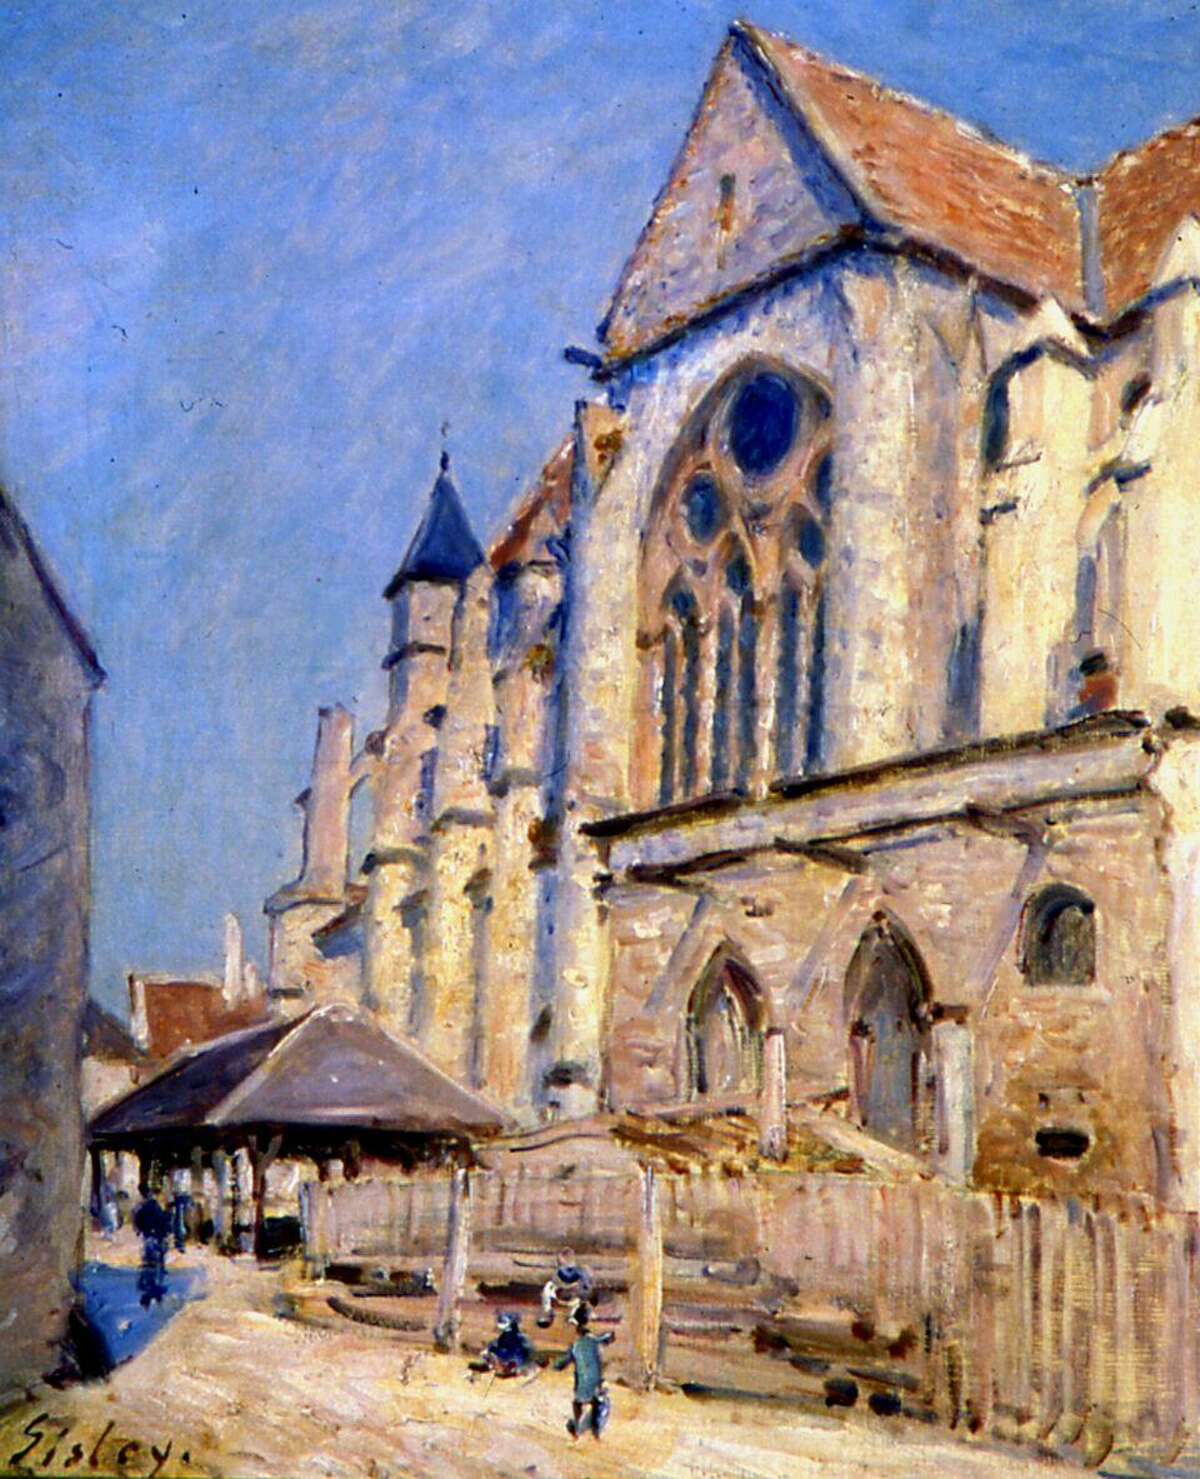 Alfred Sisley’s “Church at Moret,” 1893, an oil on canvas on loan to the Bruce Museum from the Musée Calvet d’Avignon, France.